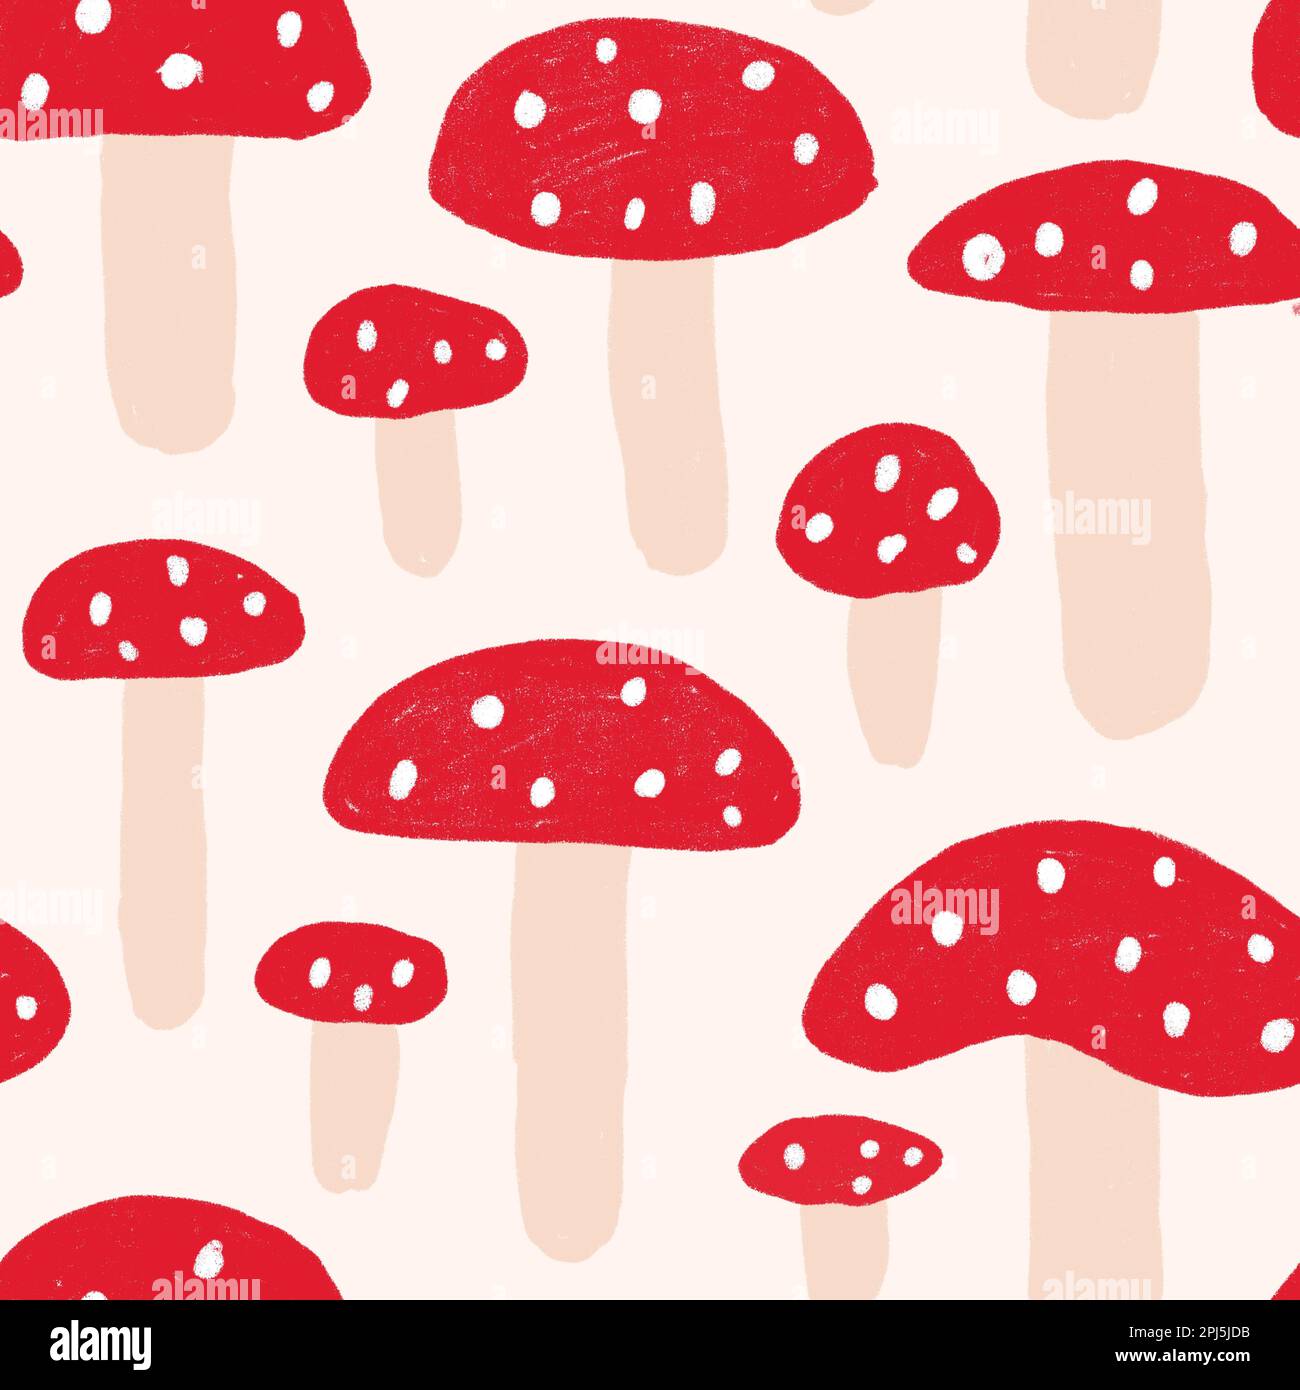 Watercolor hand drawn seamless pattern illustration of amanita muscaria mushrooms with red caps in forest wood woodland. Children funny cartoon style textile wallpaper Stock Photo